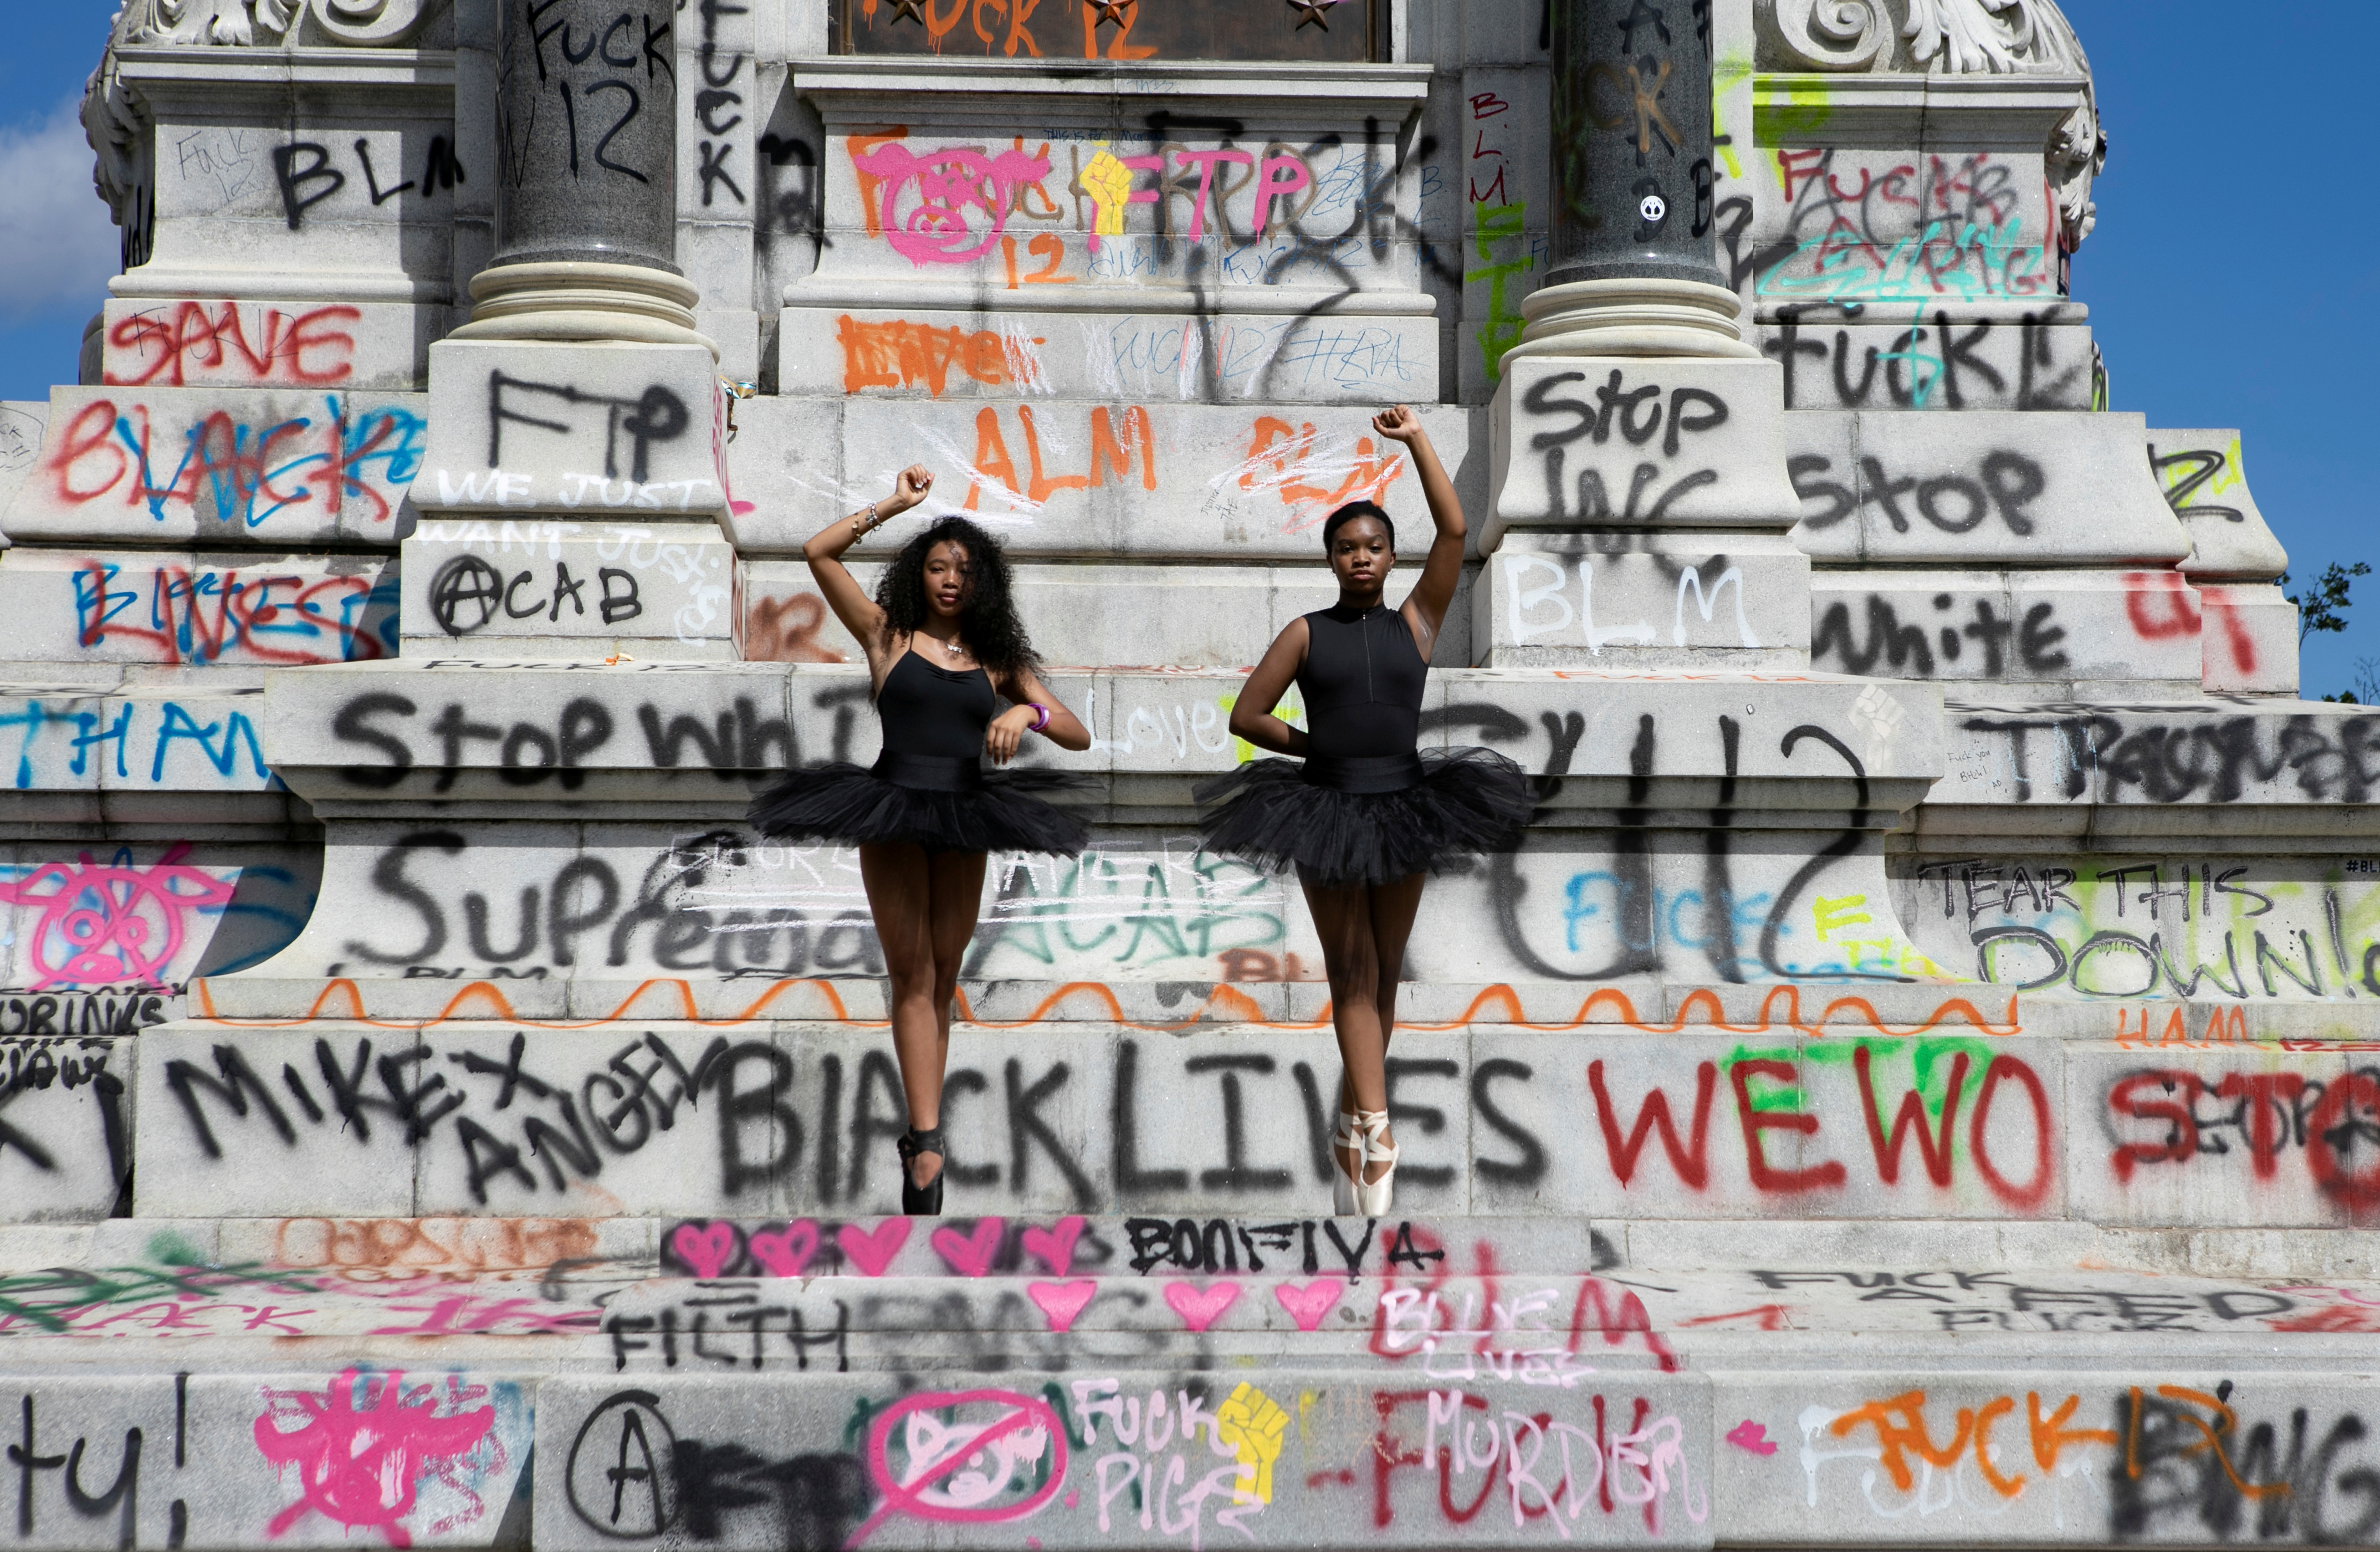 Ballerinas Kennedy George, 14, and Ava Holloway, 14, pose in front of a monument of Confederate general Robert E. Lee after Virginia Governor Ralph Northam ordered its removal after widespread civil unrest following the death in Minneapolis police custody of George Floyd, in Richmond, Virginia, U.S. June 5, 2020. REUTERS/Julia Rendleman